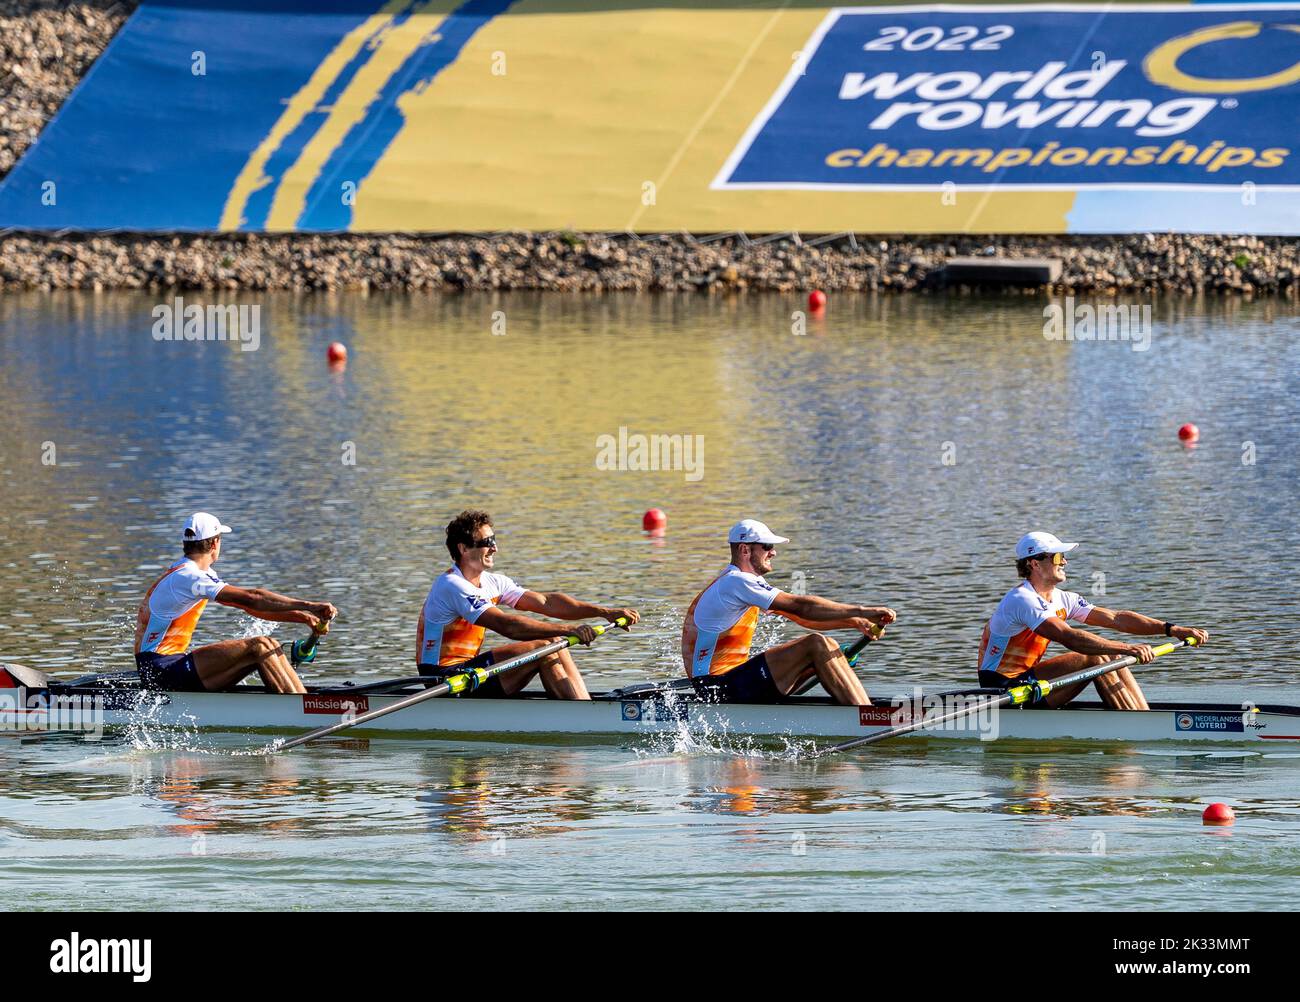 Racice, Czech Republic. 24th Sep, 2022. Ralf Rienks, Ruben Knab, Sander De Graaf, Rik Rienks of Netherlands compete in Men's Four Final A during Day 7 of the 2022 World Rowing Championships at the Labe Arena Racice on September 24, 2022 in Racice, Czech Republic. Credit: Ondrej Hajek/CTK Photo/Alamy Live News Stock Photo